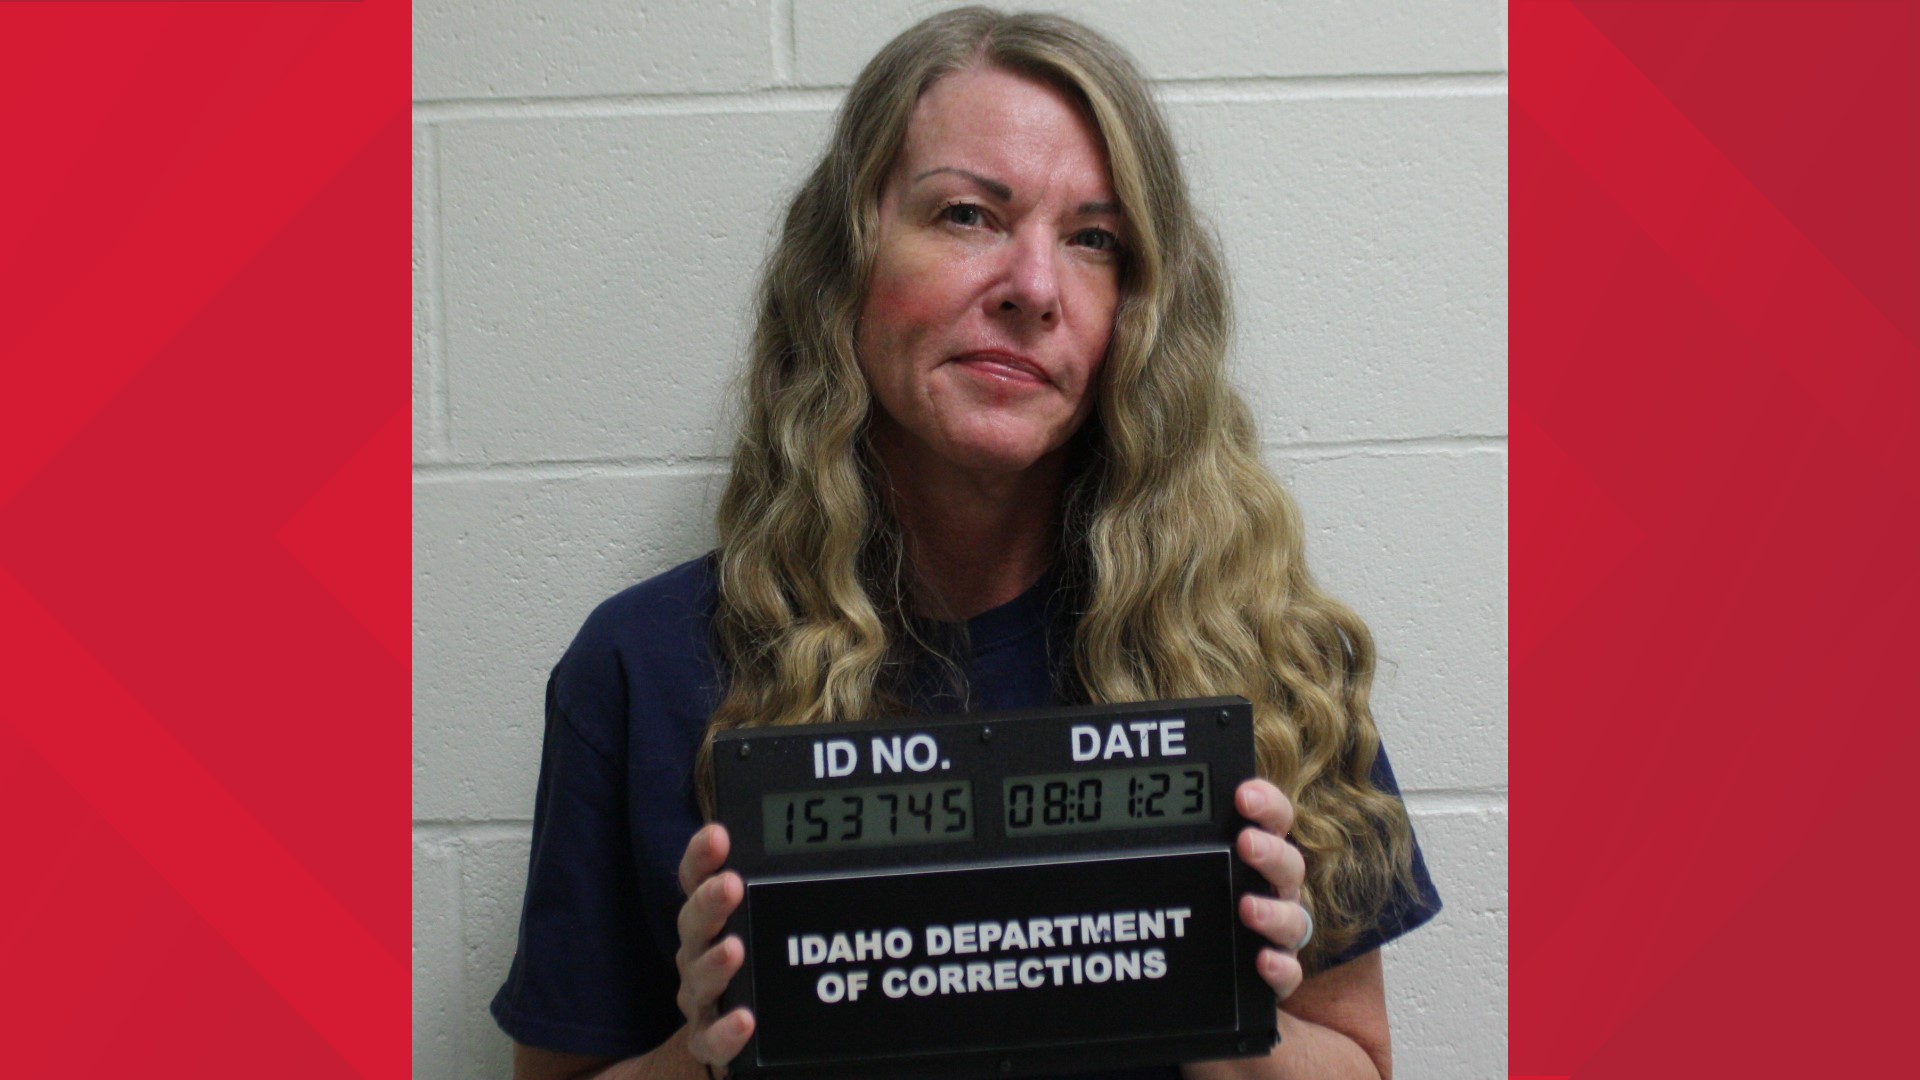 Lori Vallow has been booked into the Pocatello Women's Correctional Center in Idaho to being serving her life sentence without the possibility of parole.